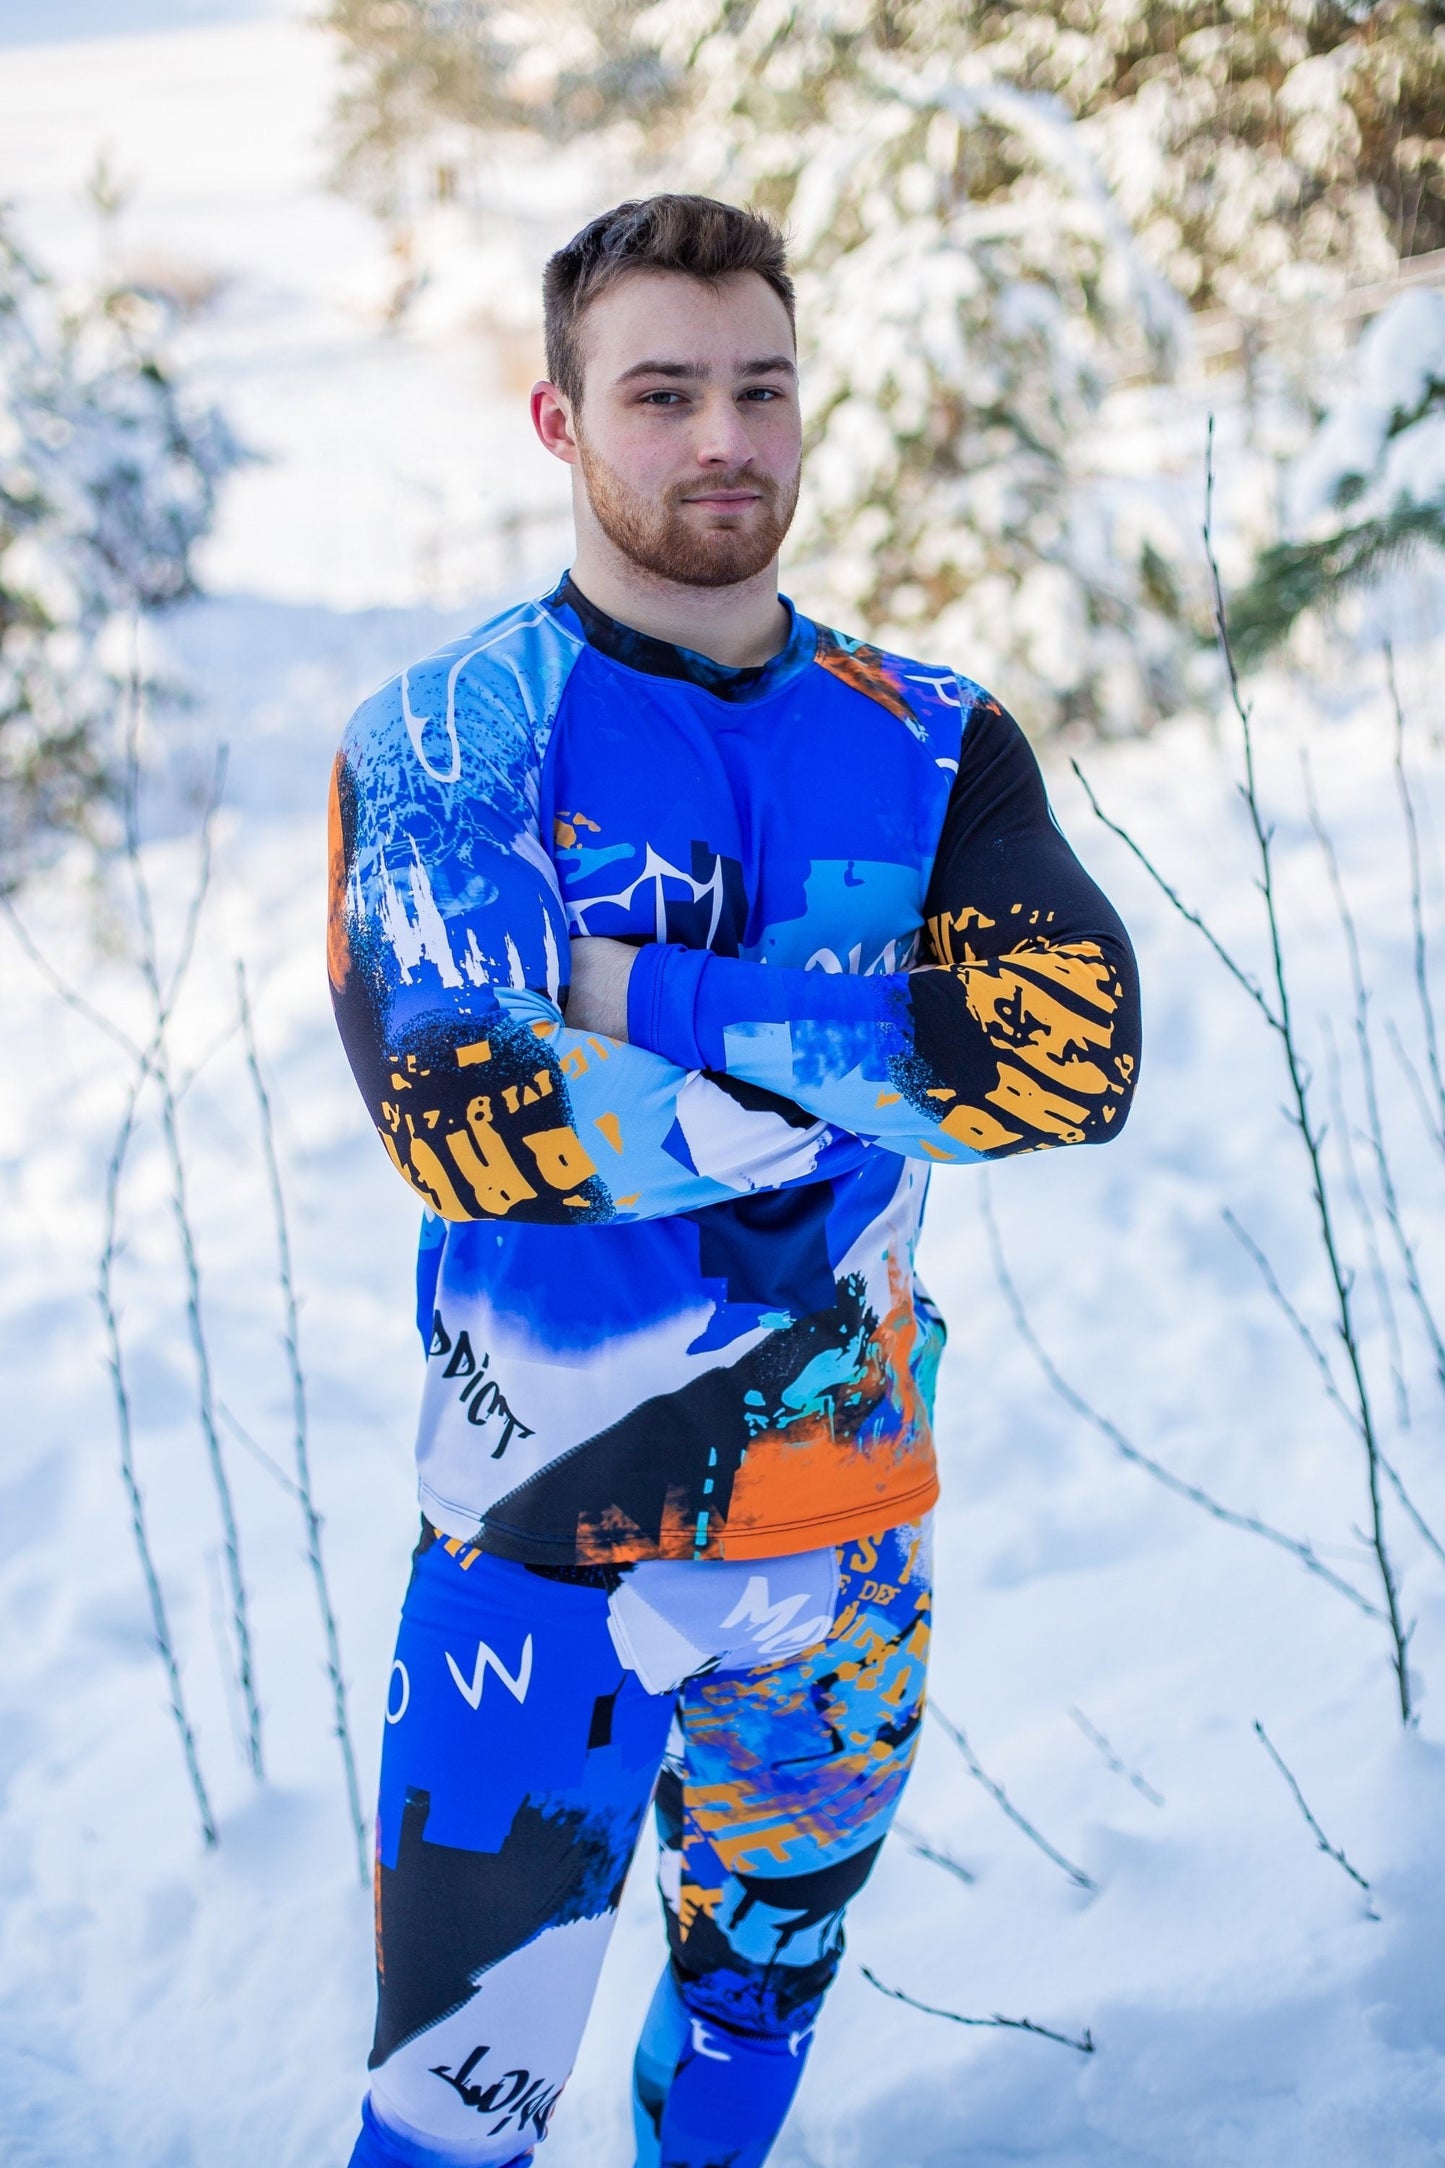 SET: Men's Blue Winter Ski Jumpsuit, Snowboard Clothes, Snowboard suit, Skiing Overall, Men's Mountain's clothes, Winter Thermal underwear